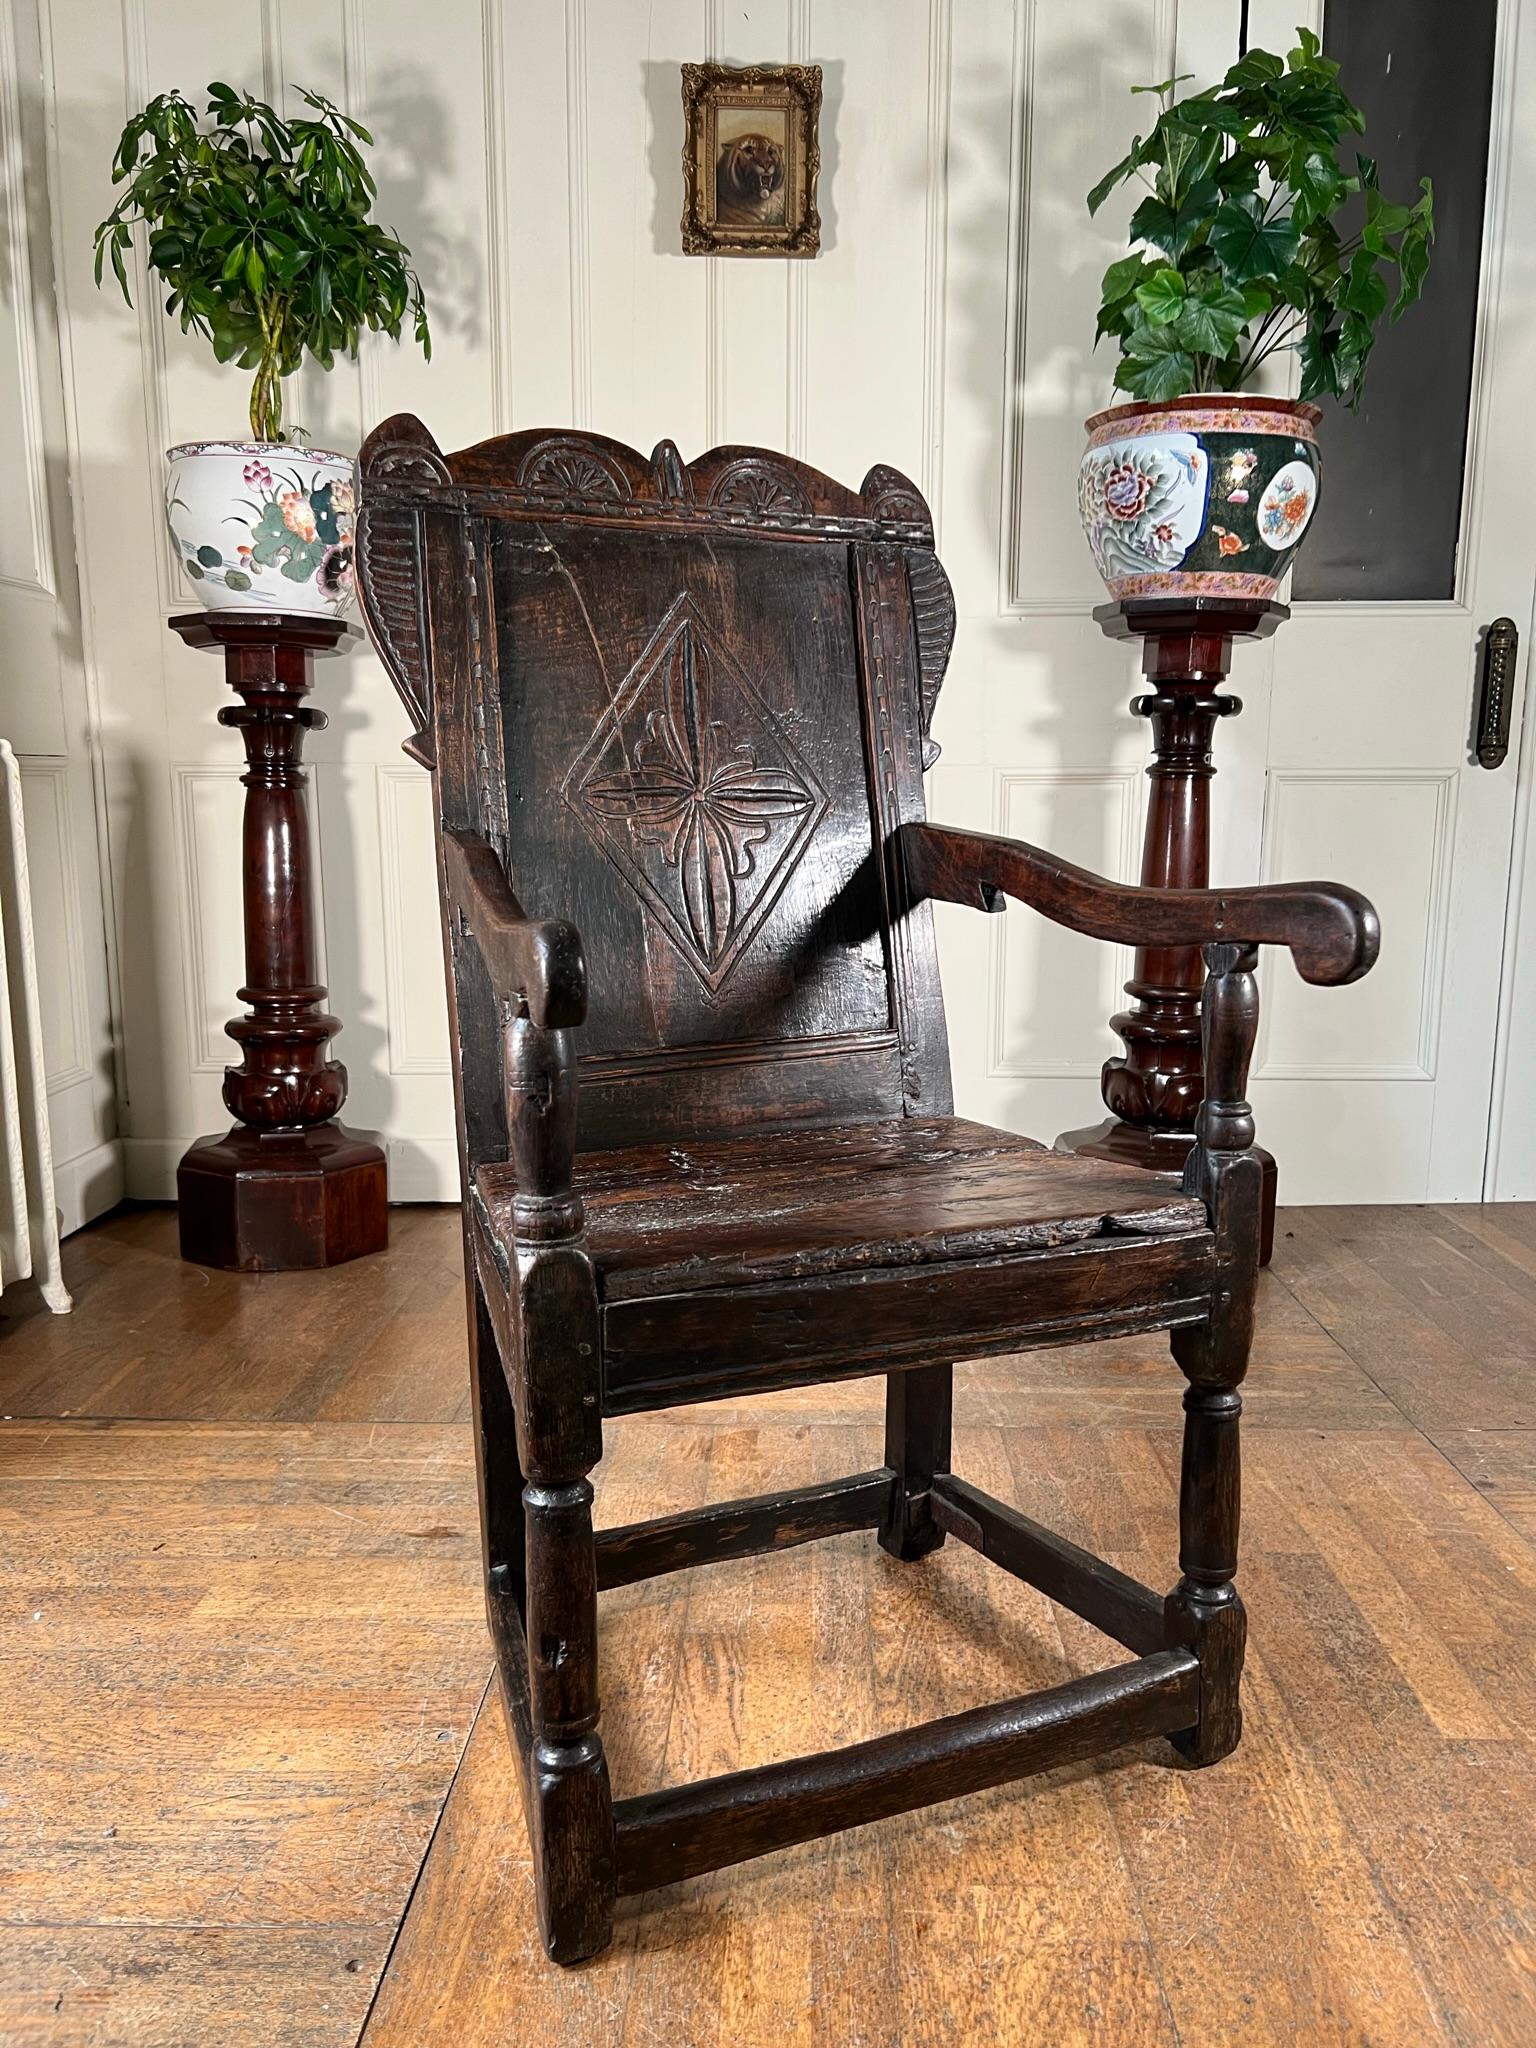 Early 18th century jointed armchair of large proportions.

Belonging to the head of the household this chair has been well used during its lifetime creating a beautiful patination to the oak, with signs of wear commensurate to age.

Single panel